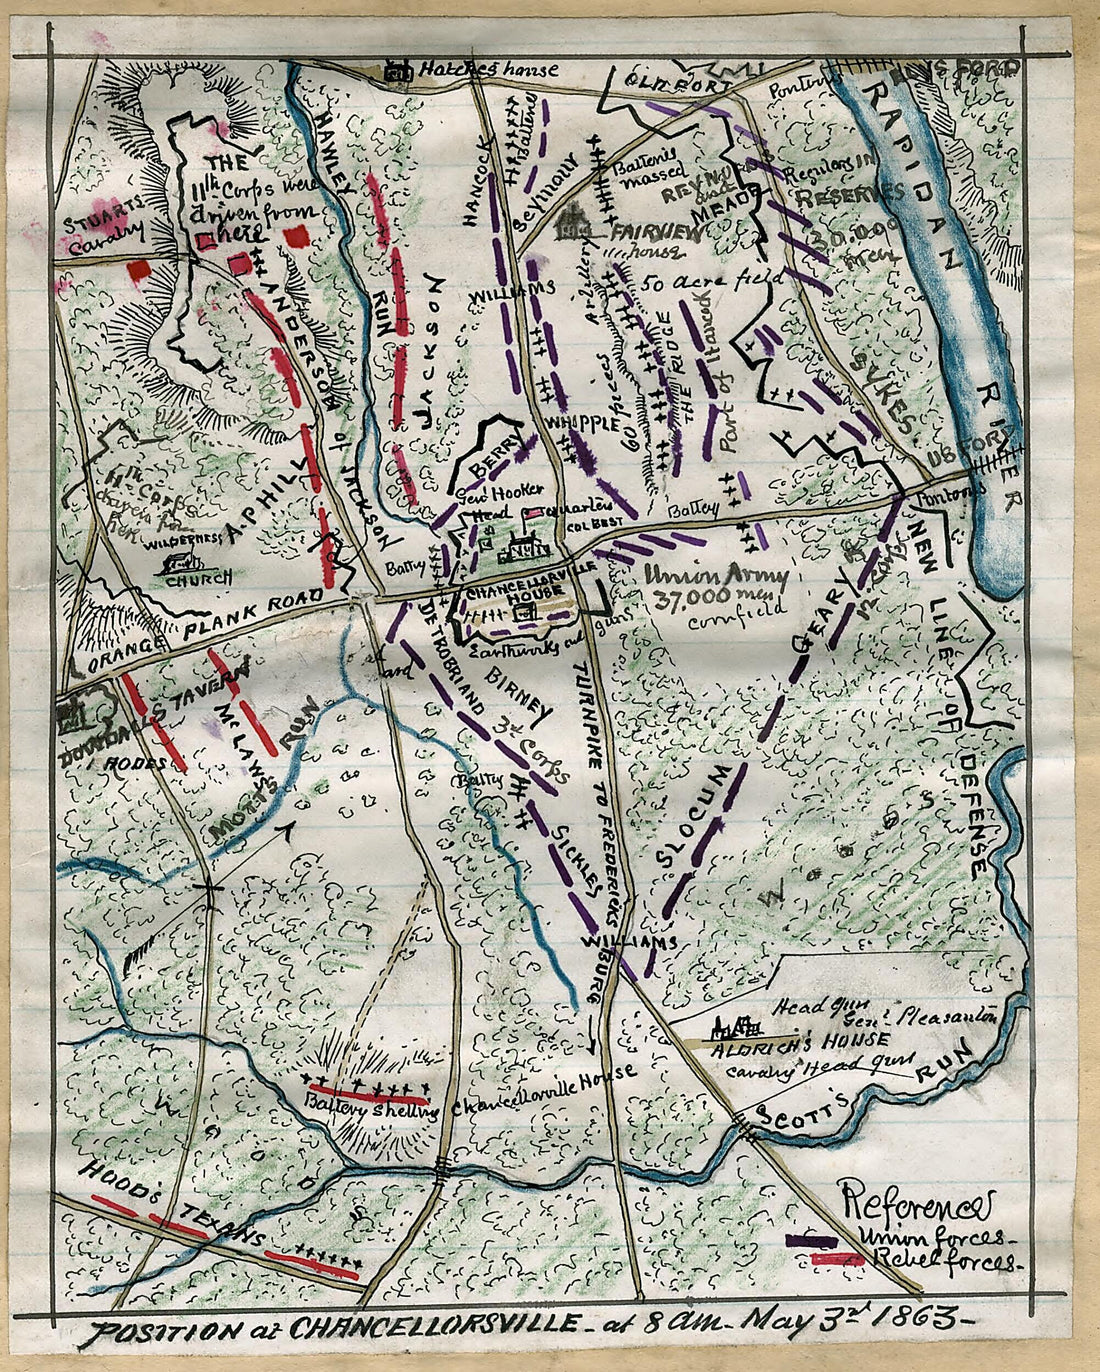 This old map of Position at Chancellorsville at 8 A.m. May 3rd 1863 from 05-03 was created by Robert Knox Sneden in 05-03